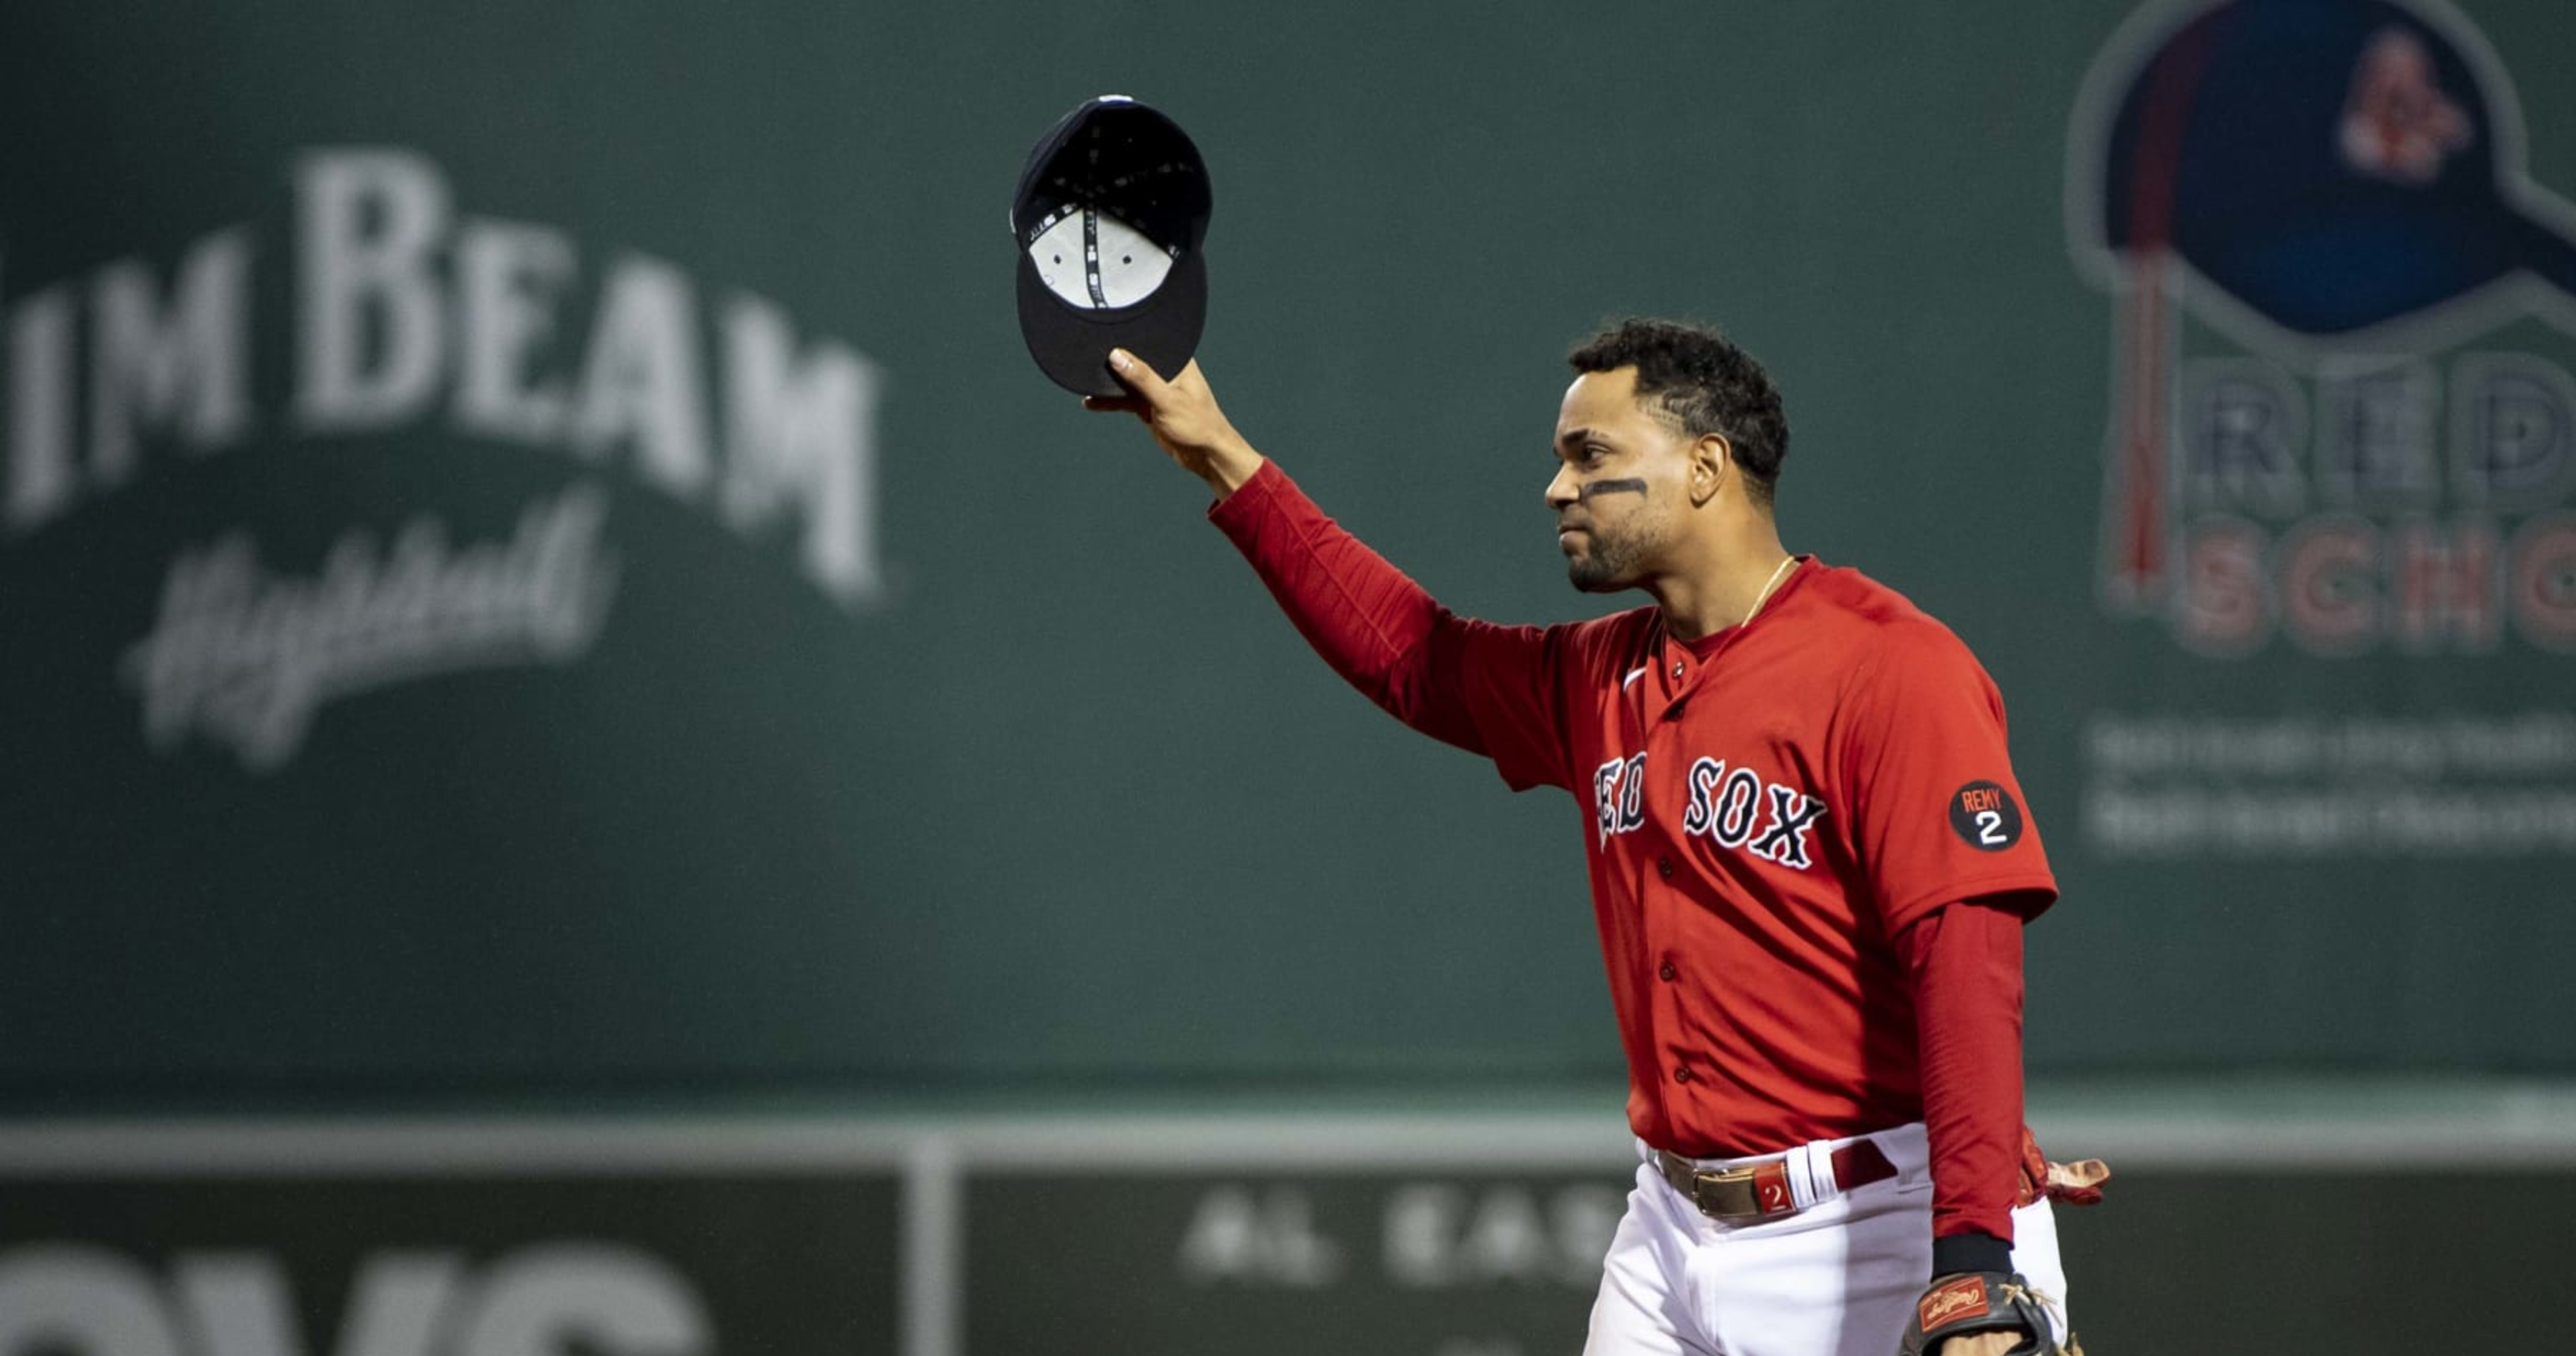 A Star Among Superstars: What Makes Bogaerts the “X” Factor for the Padres